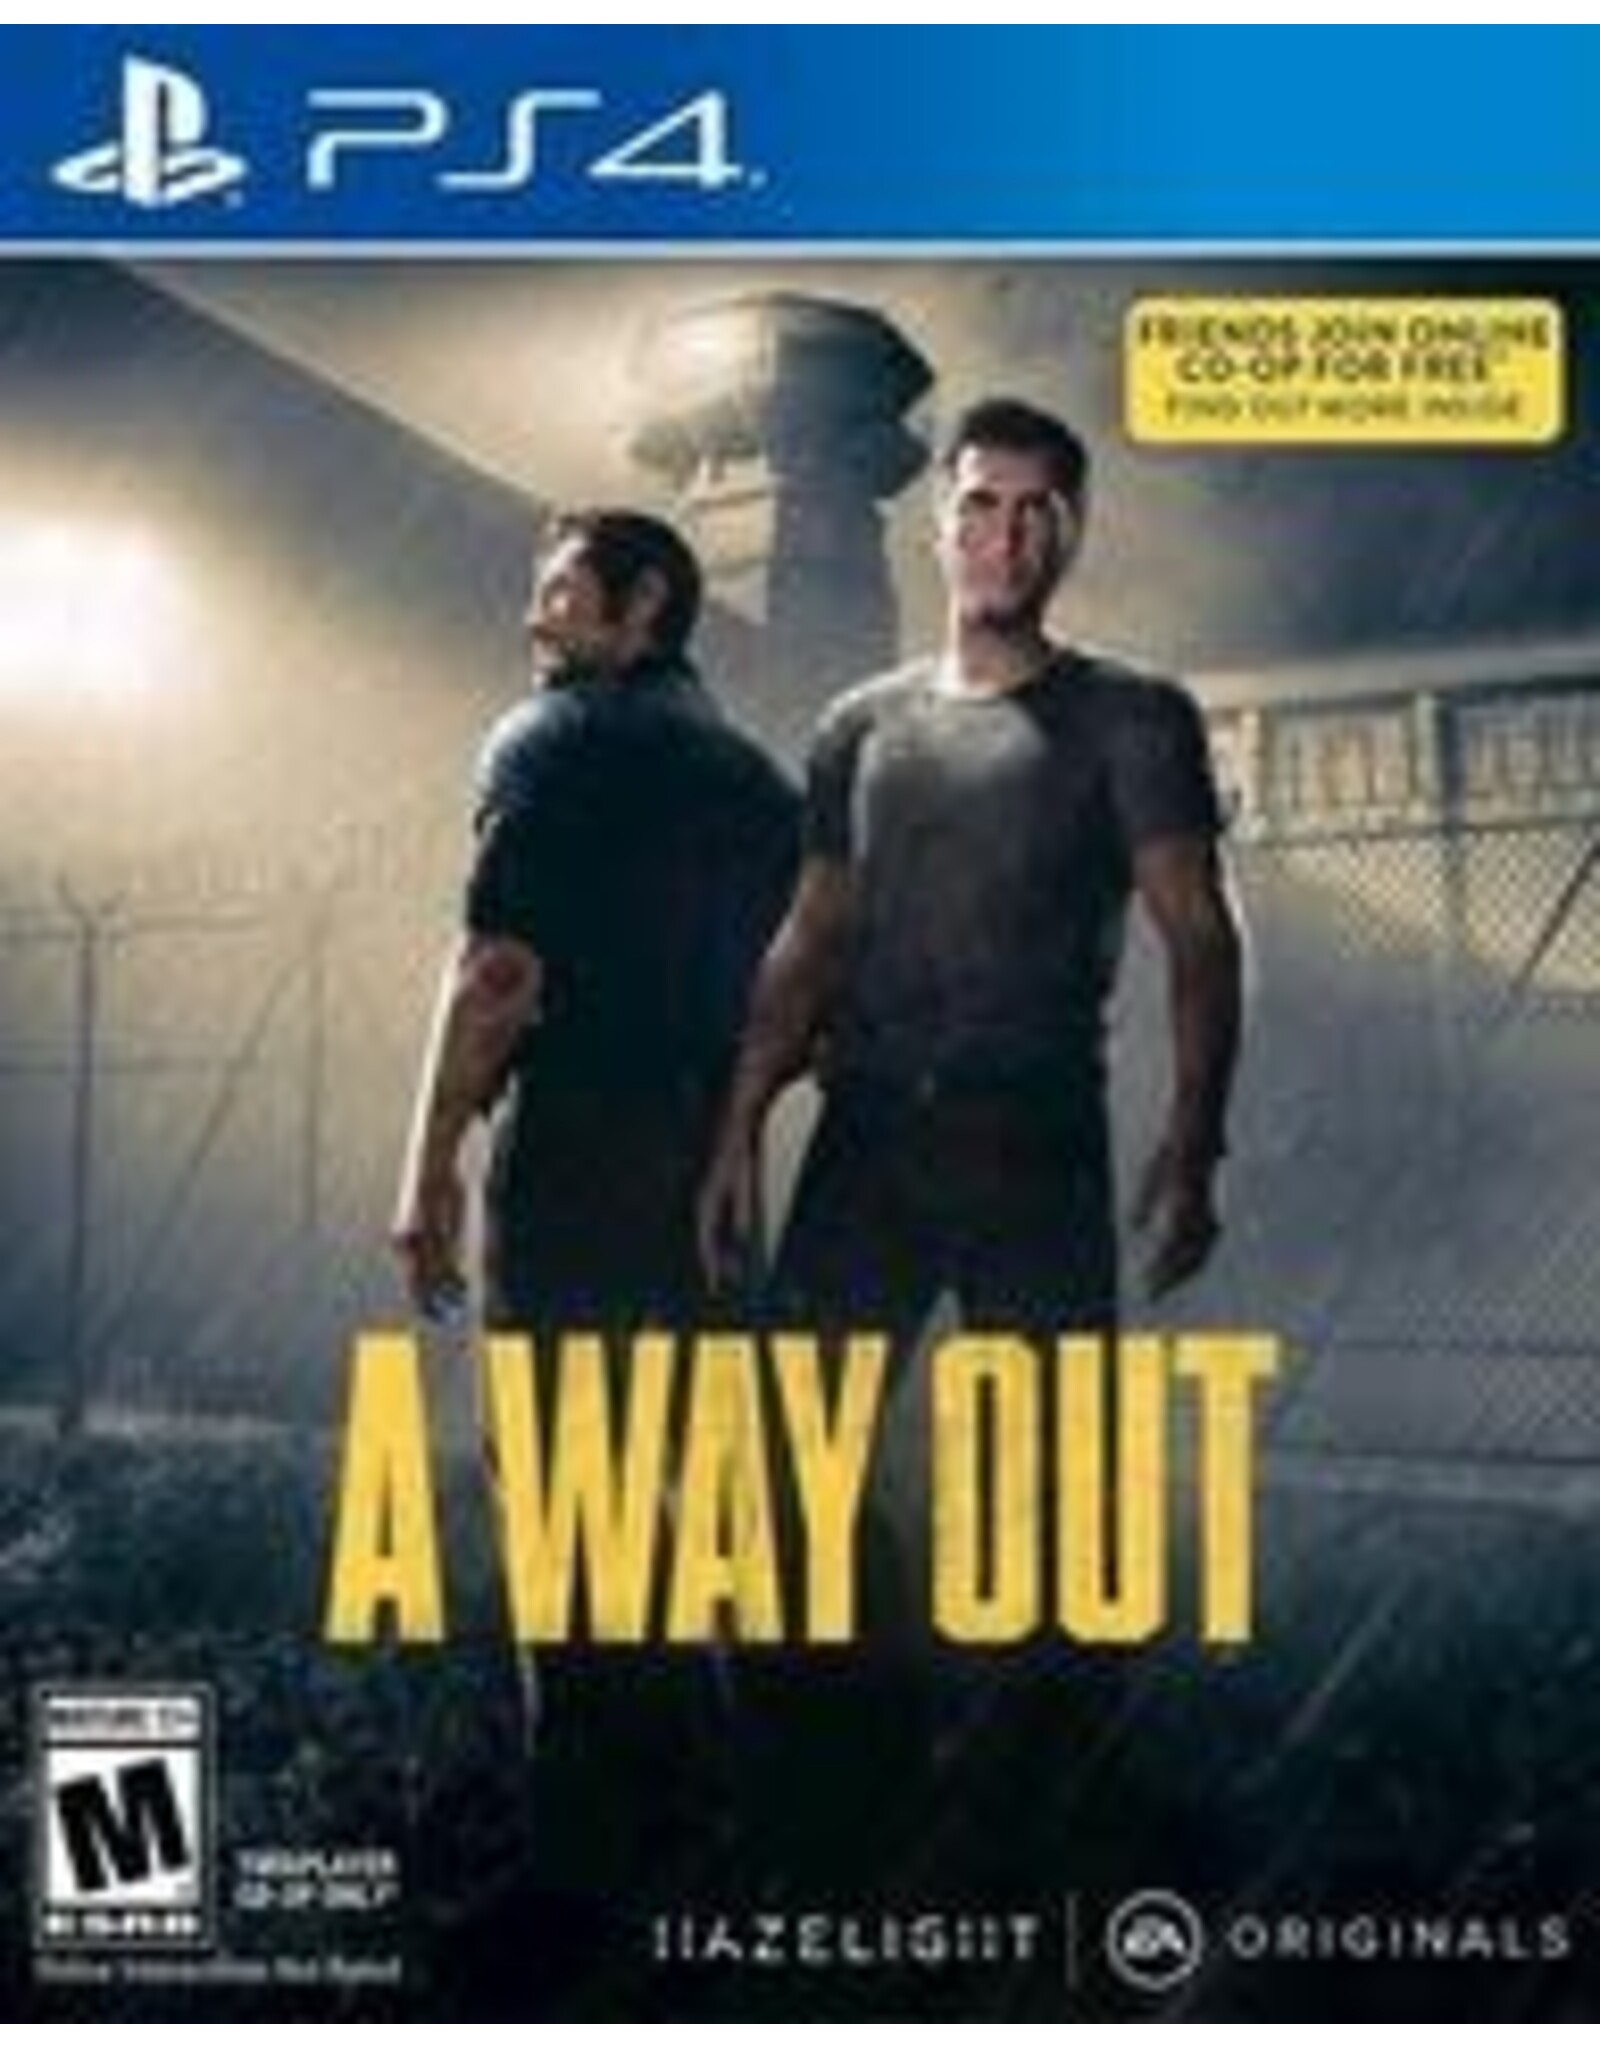 Playstation 4 A Way Out (Used)